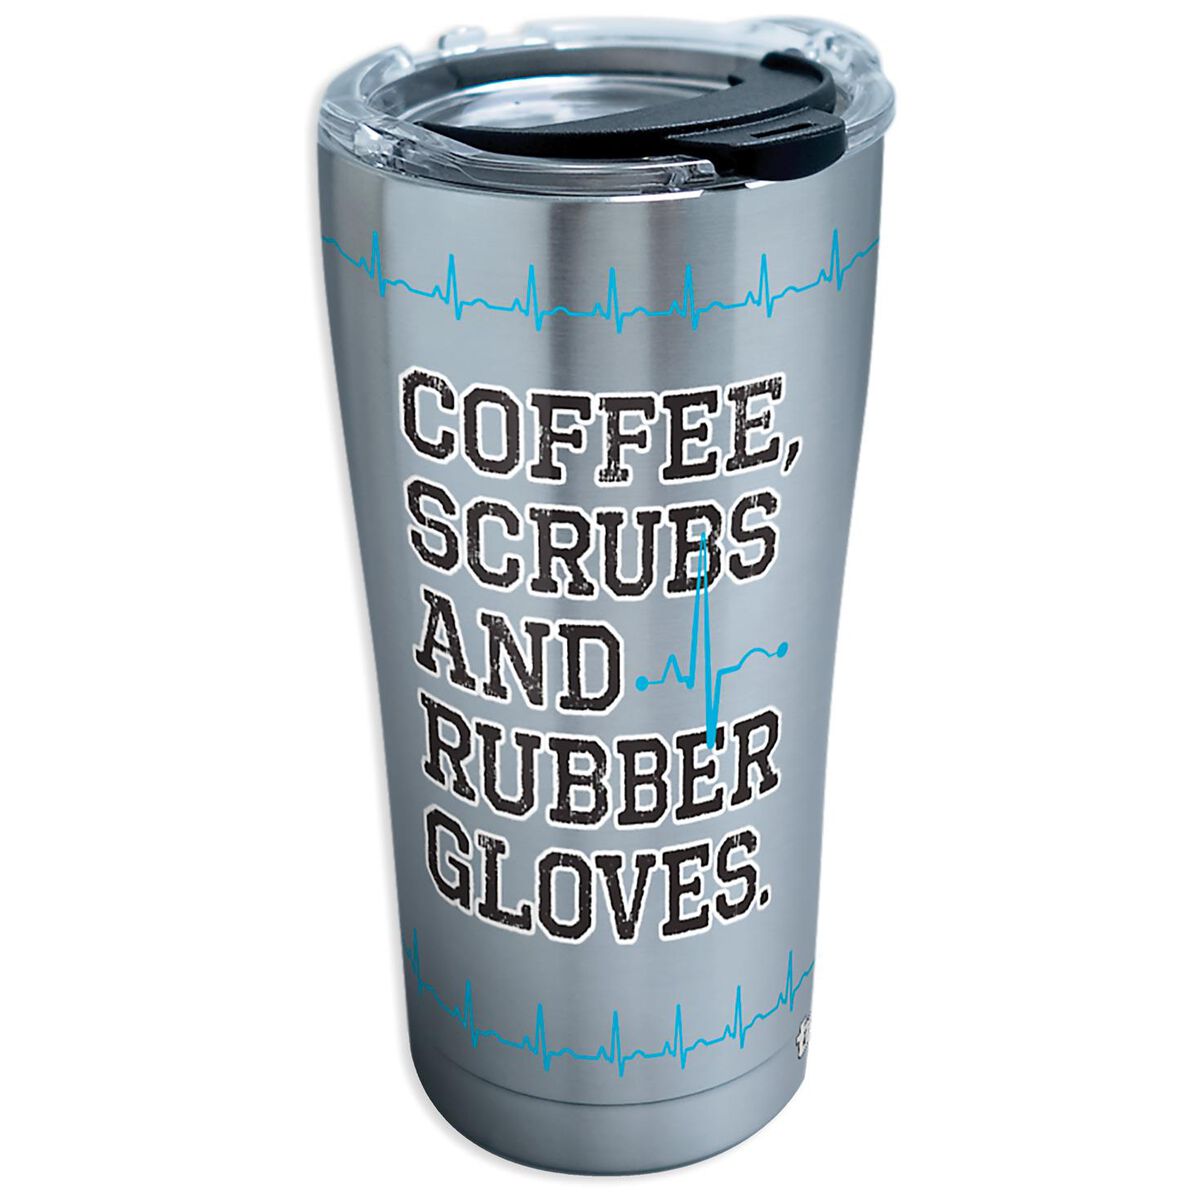 Tervis Coffee Scrubs Rubber Gloves Stainless Steel Tumbler, 20 oz ...